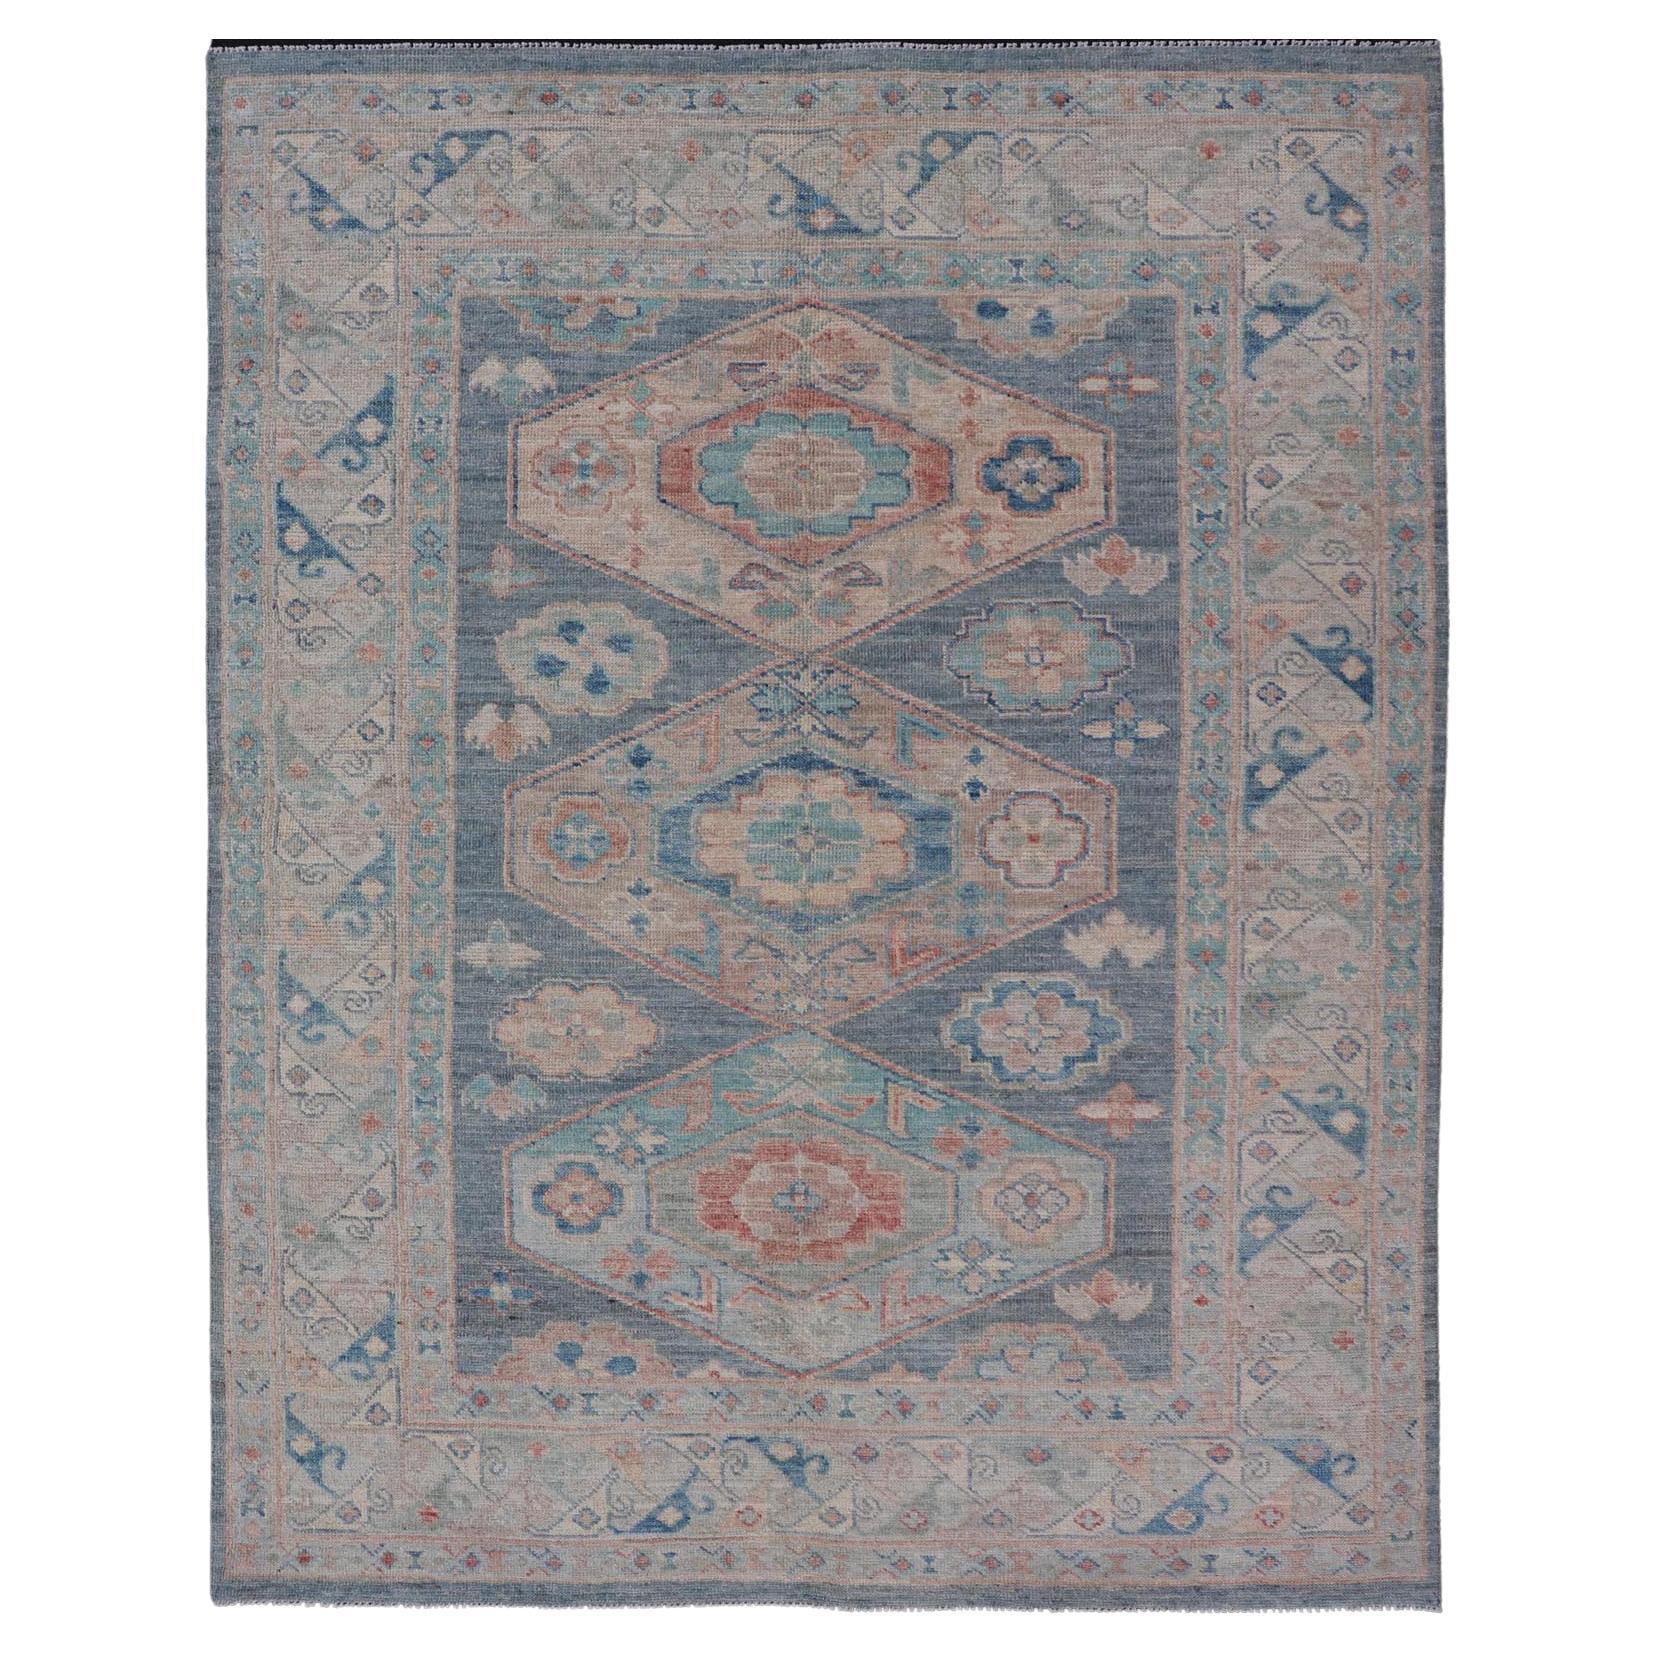 Modern Oushak with Large Medallion Design on a Blue-Gray Field